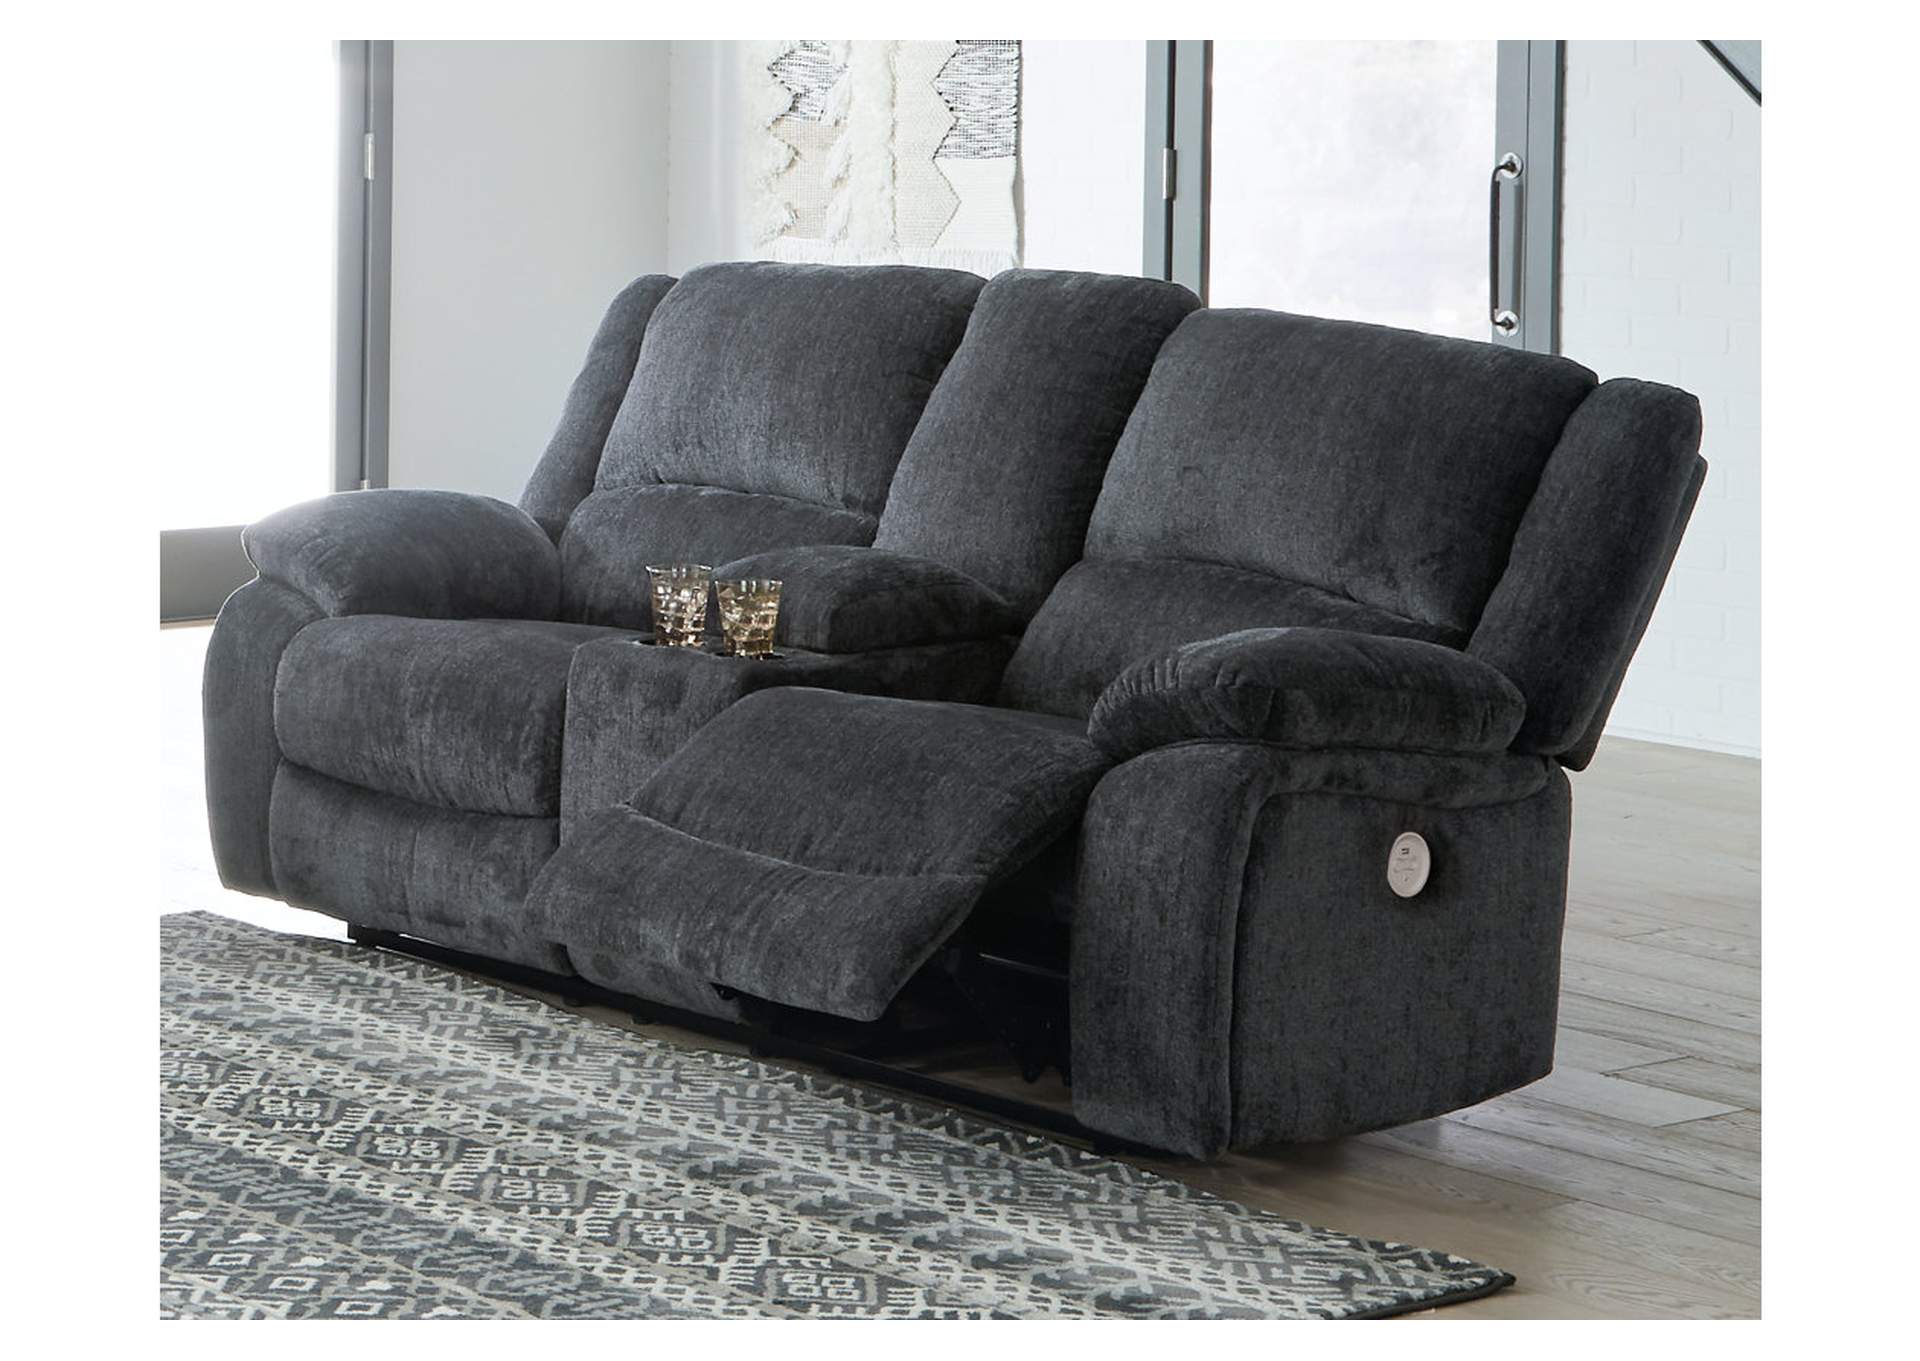 Draycoll Sofa and Loveseat,Signature Design By Ashley